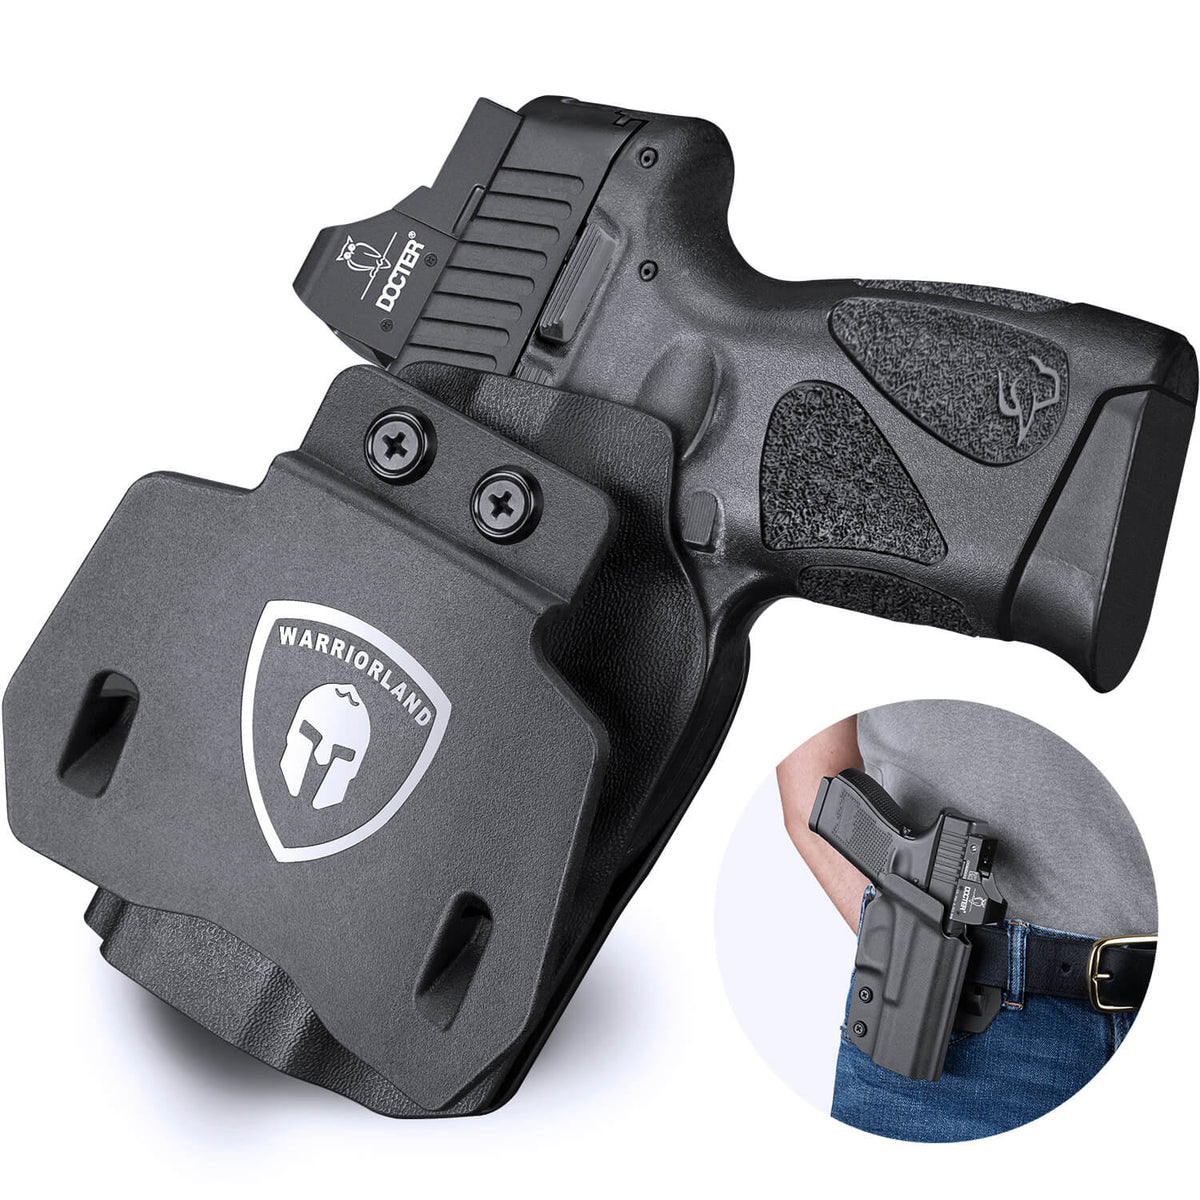 Taurus G2C G3C Millennium G2 PT111 PT140 OWB Open Carry Kydex Paddle Holster with Red Dot Optics Cut Trigger Guard Right/ Left Handed | WARRIORLAND